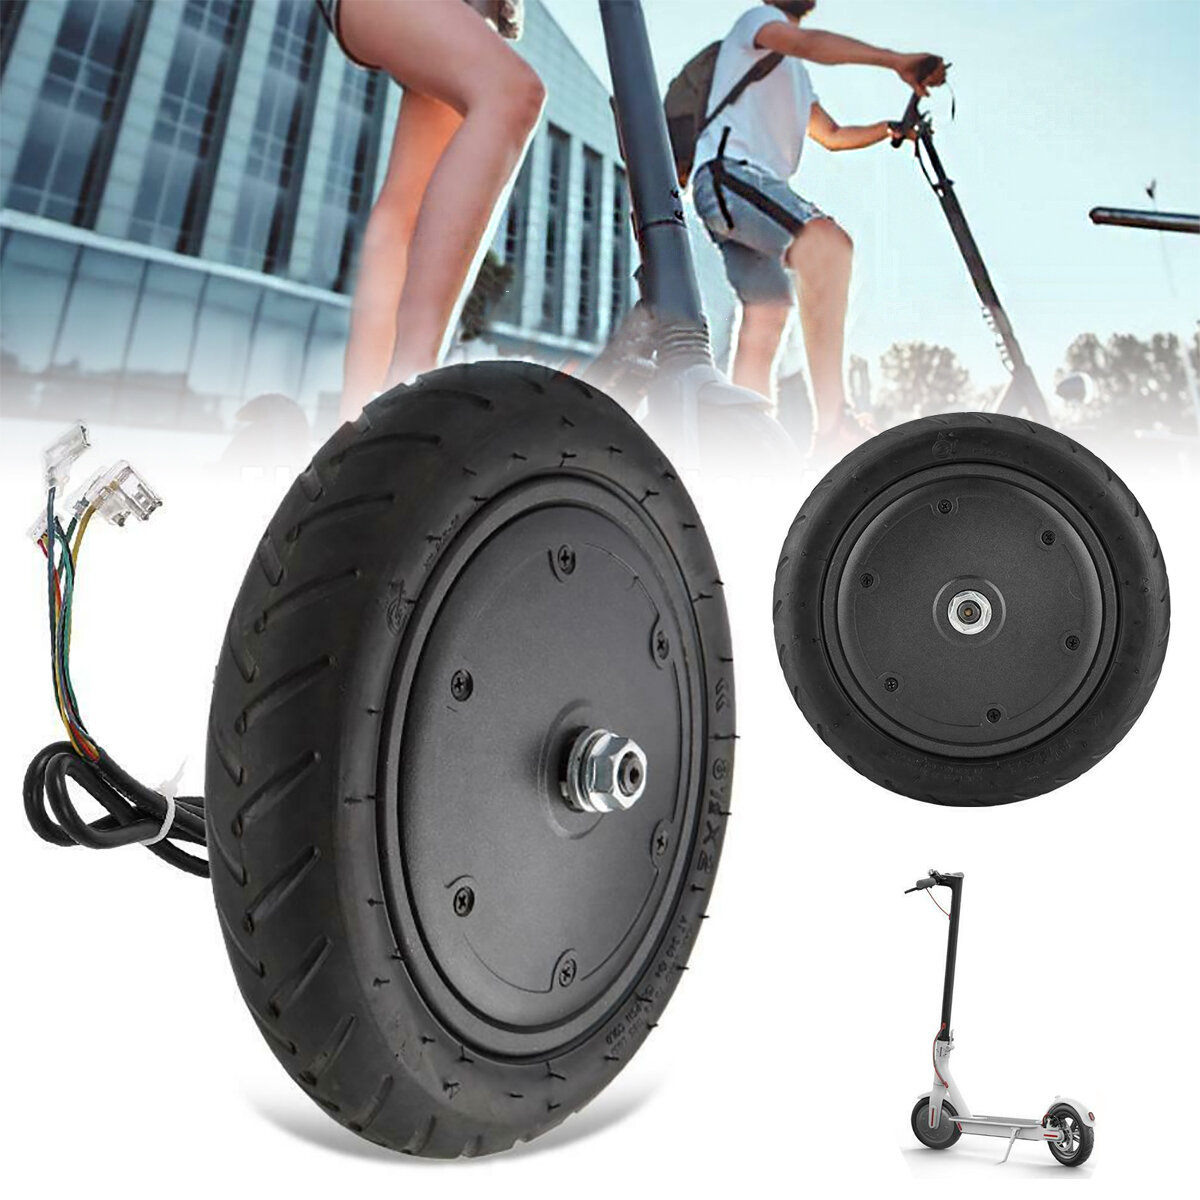 

350W 8.5 Inch Scooter Motor Explosion Proof Brushless Hub Motor Wheels Tire Ideal Replacement for M365 Electric Scooter